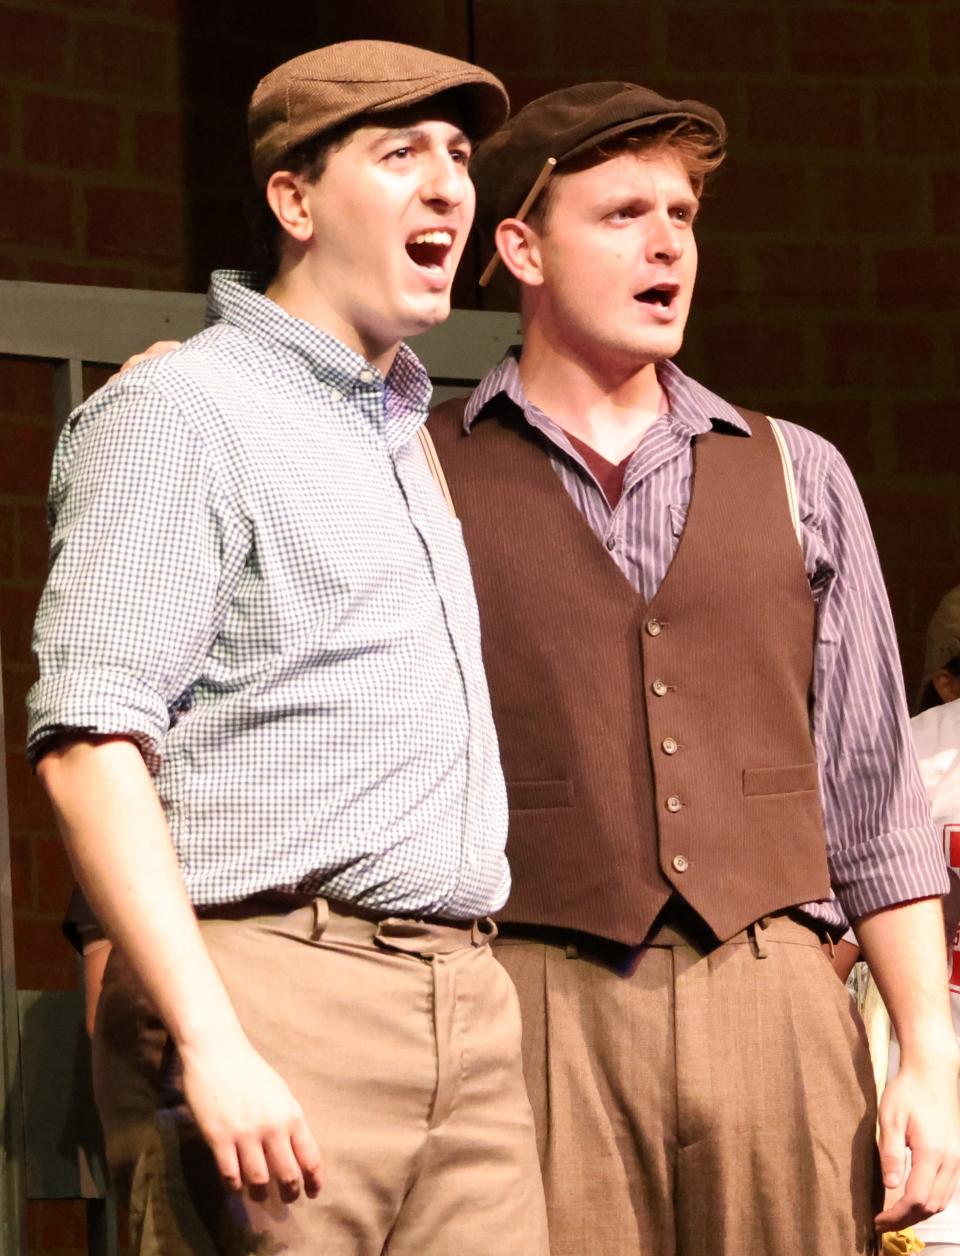 Thomas Morelli as Danny and Mitchell Sharp as Jack Kelly perform in 'Newsies the Musical' at New Castle Playhouse.